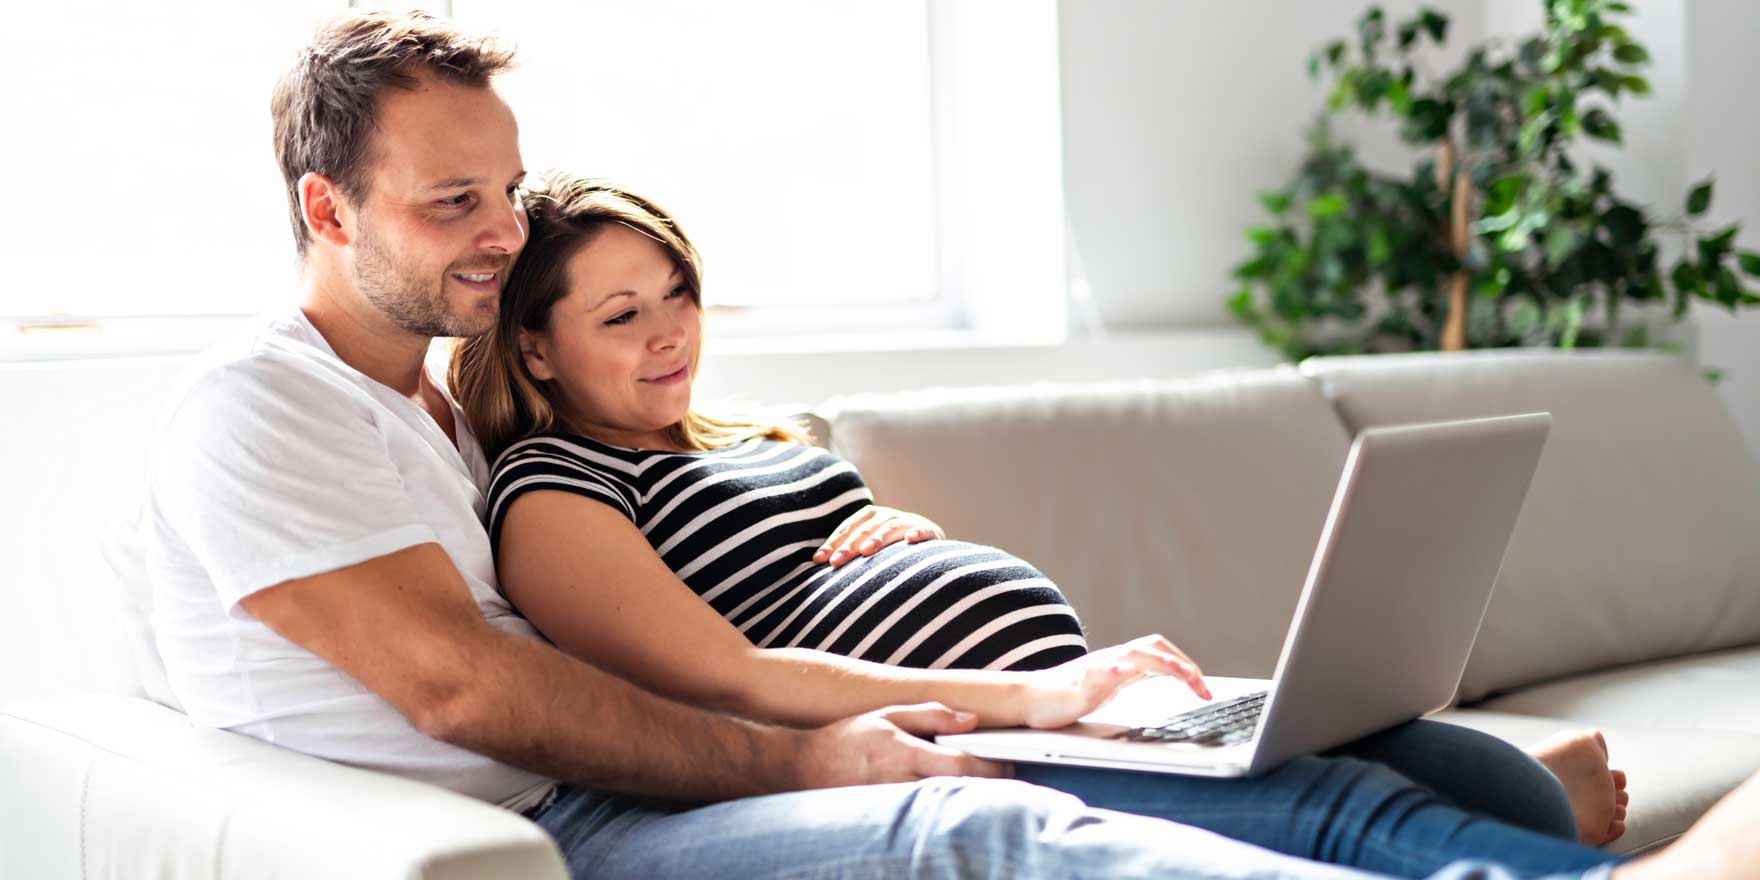 Pregnant couple sitting on a couch while viewing a computer screen